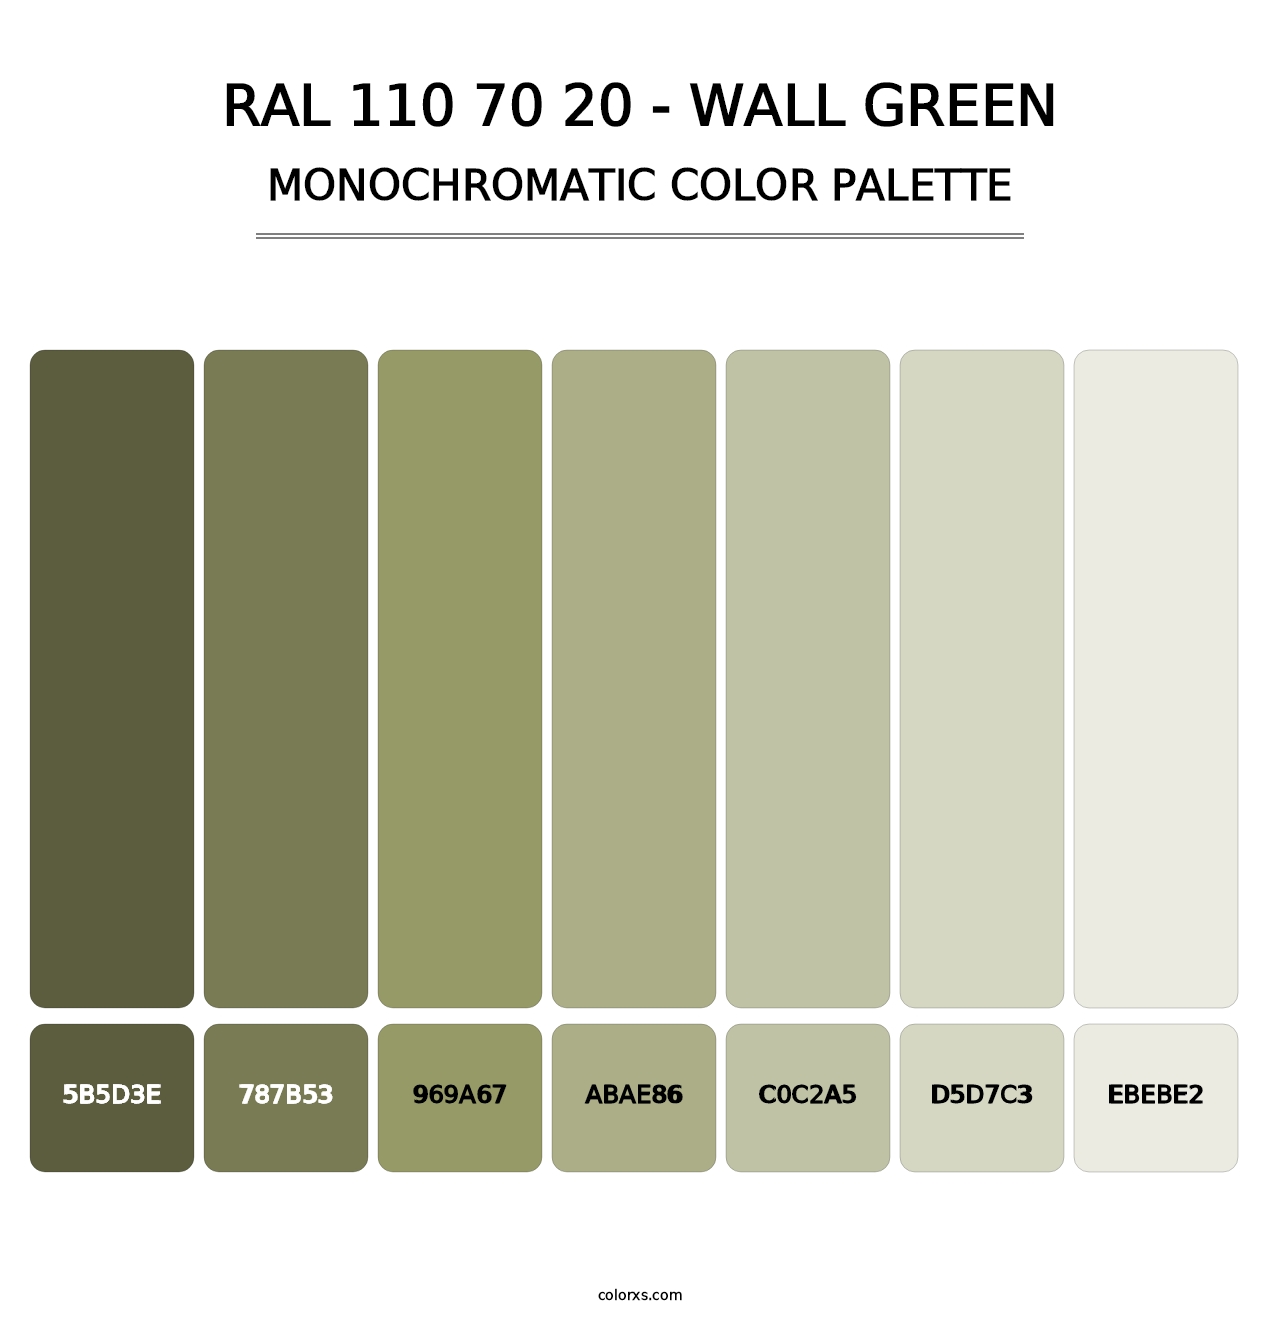 RAL 110 70 20 - Wall Green - Monochromatic Color Palette